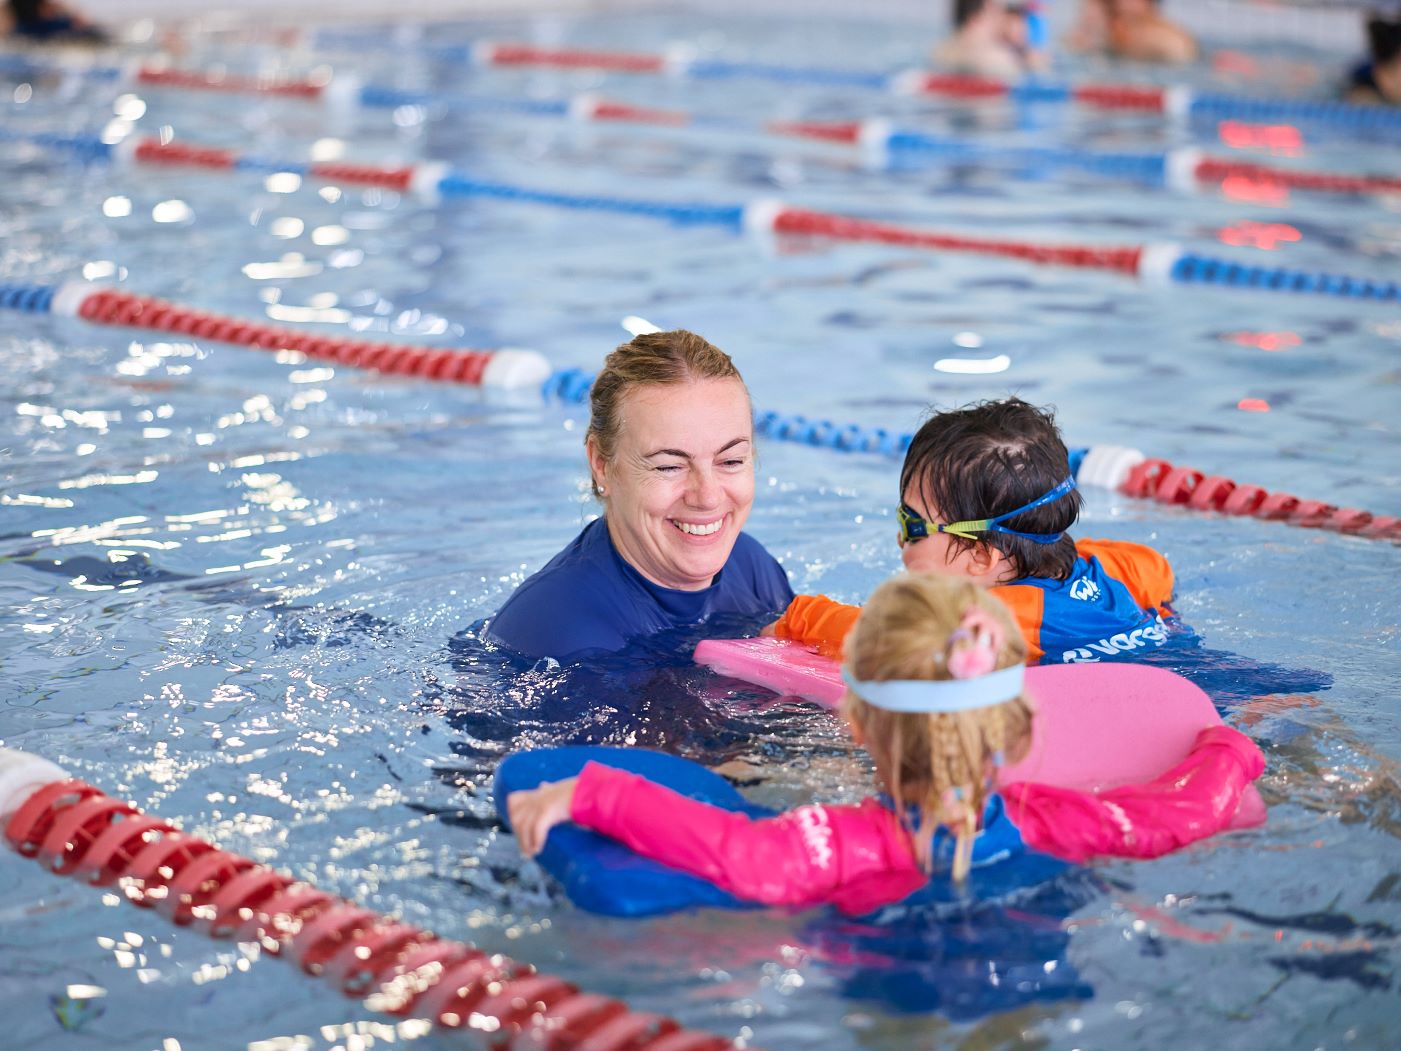 Swimming teacher smiling while teaching lessons